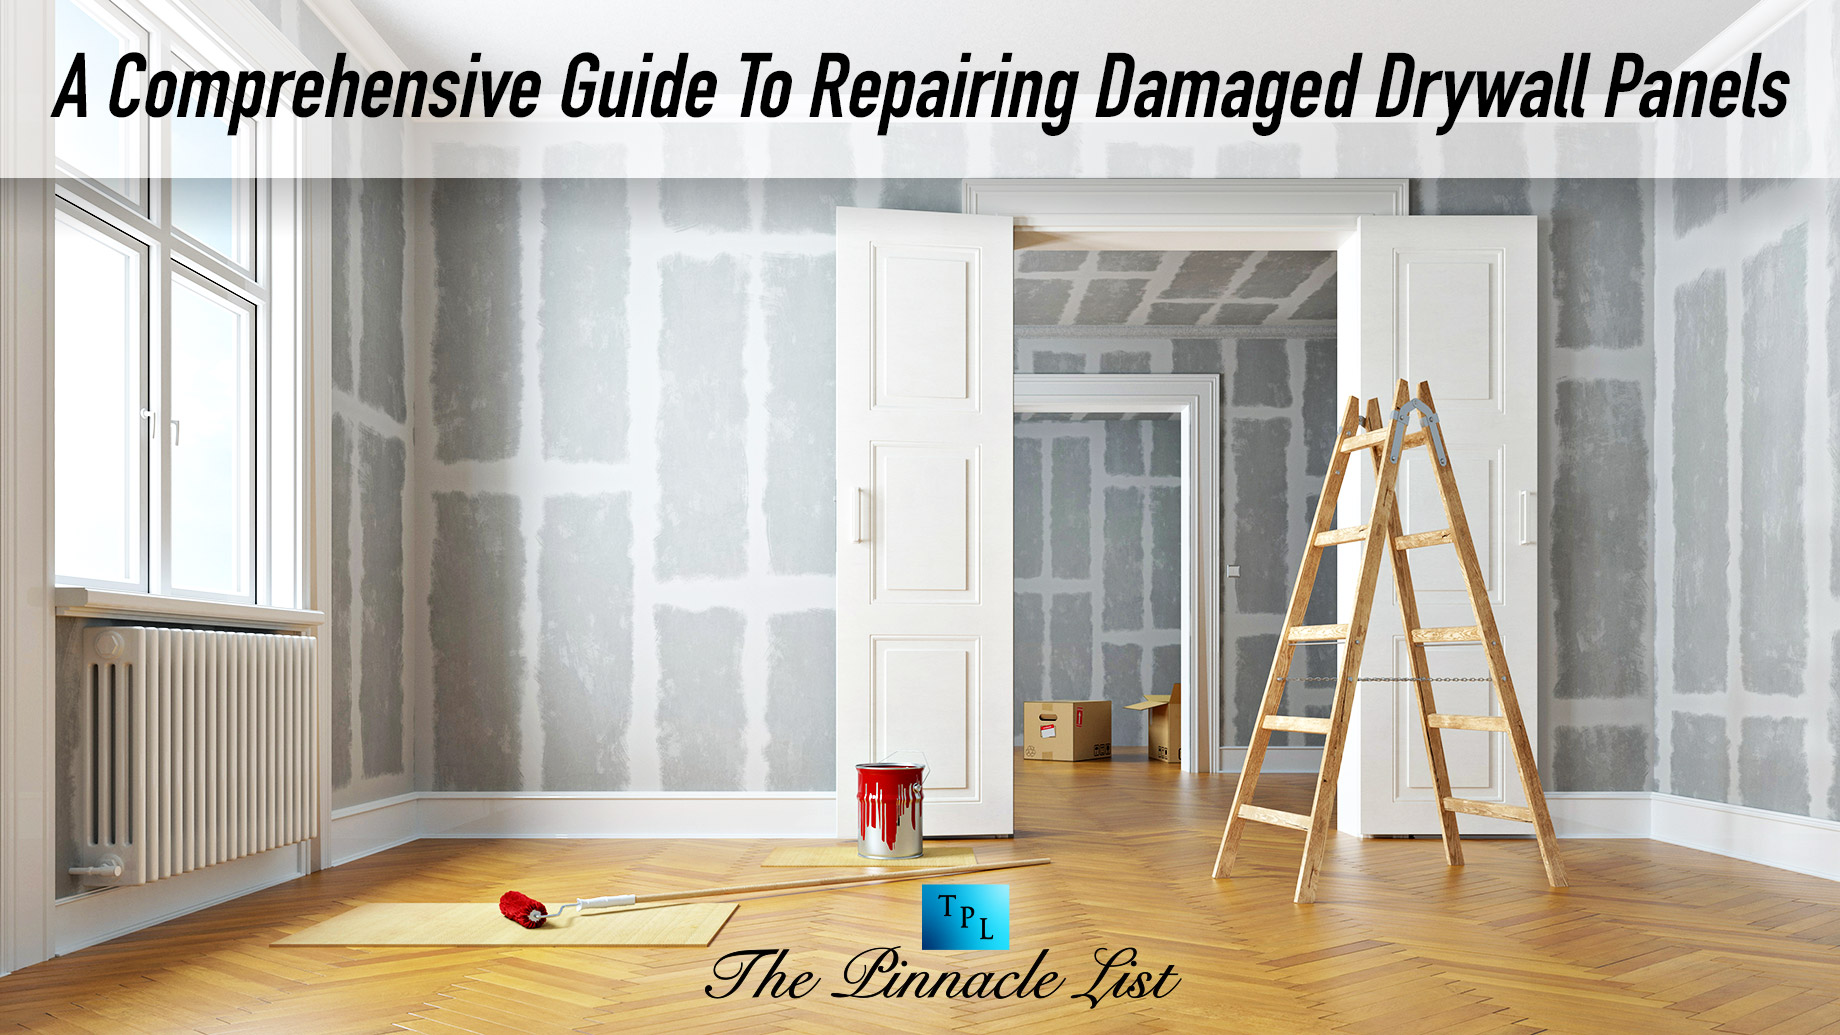 How To Make Wood Paneling Look Like Drywall: A Seamless Guide